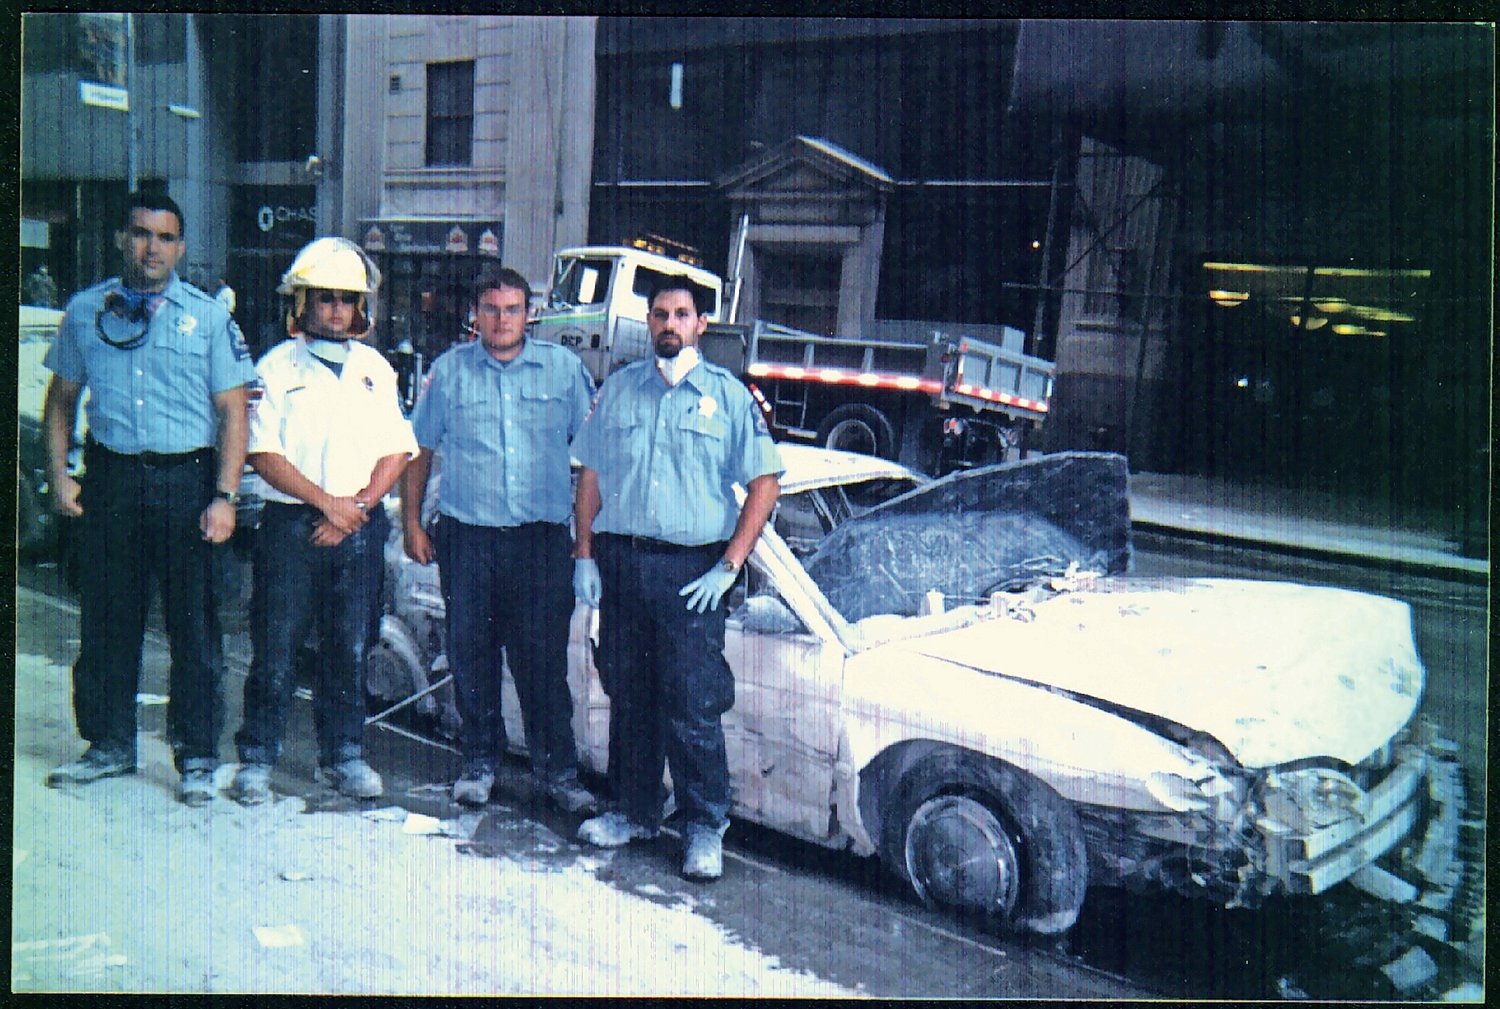 EMS members Kelly, Weinick, Tim Carroll and Ed Chasan volunteered at ground zero.